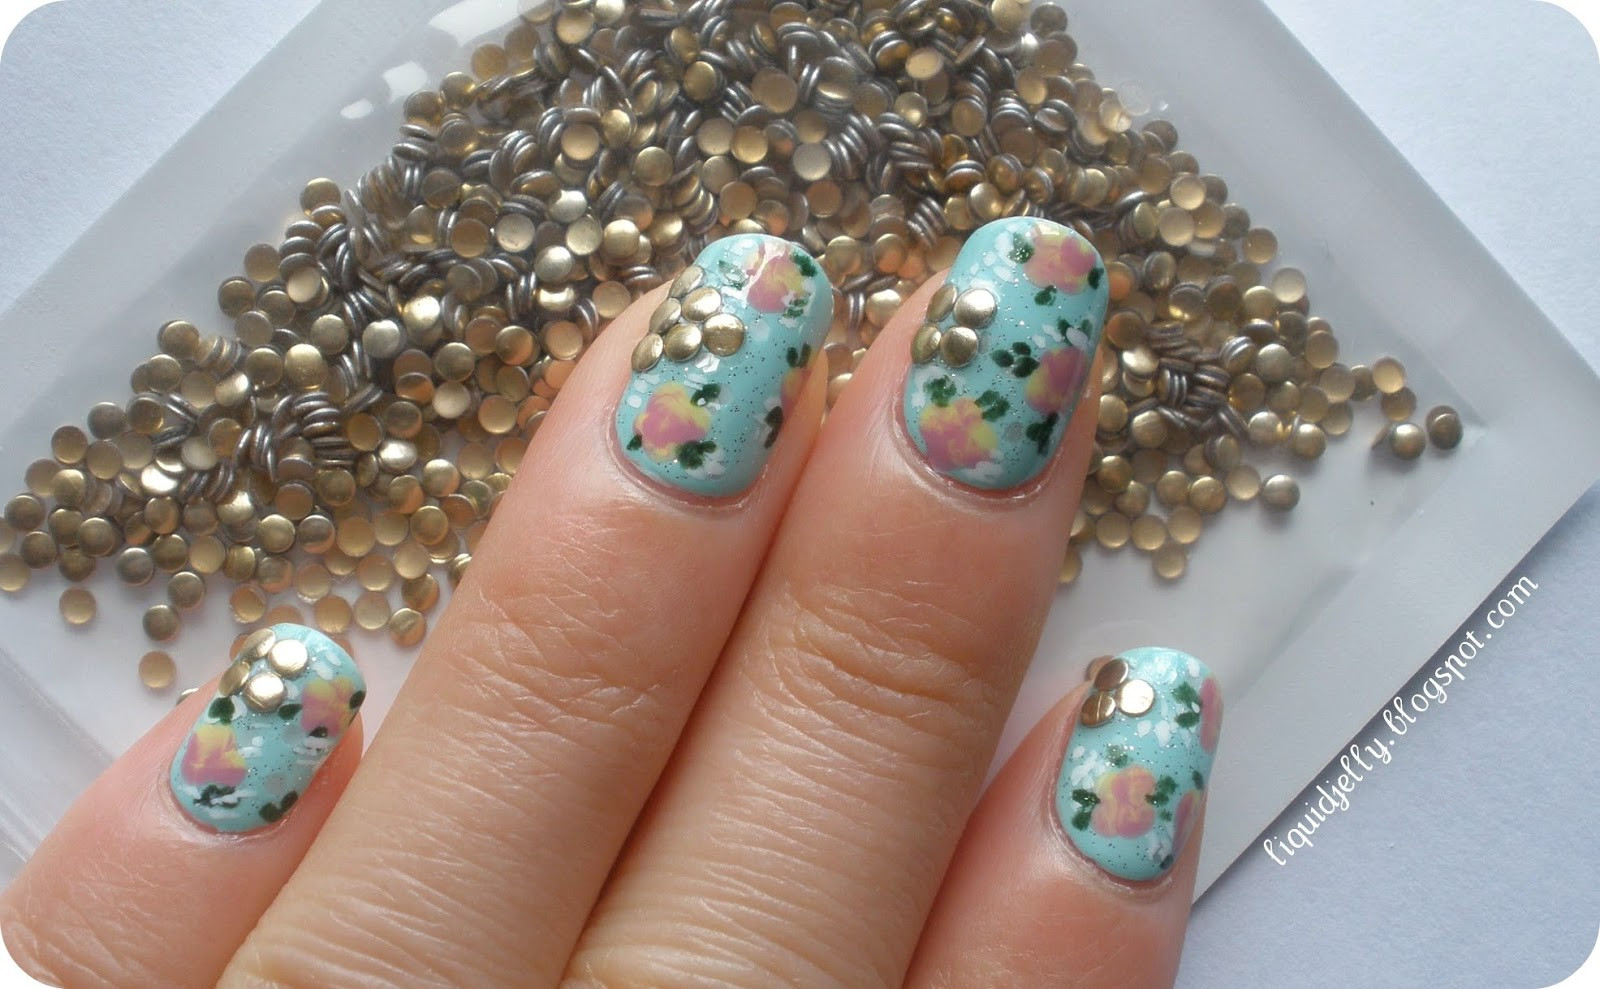 Nail Art Studs
 Liquid Jelly Floral Nail Art with BPS Studs